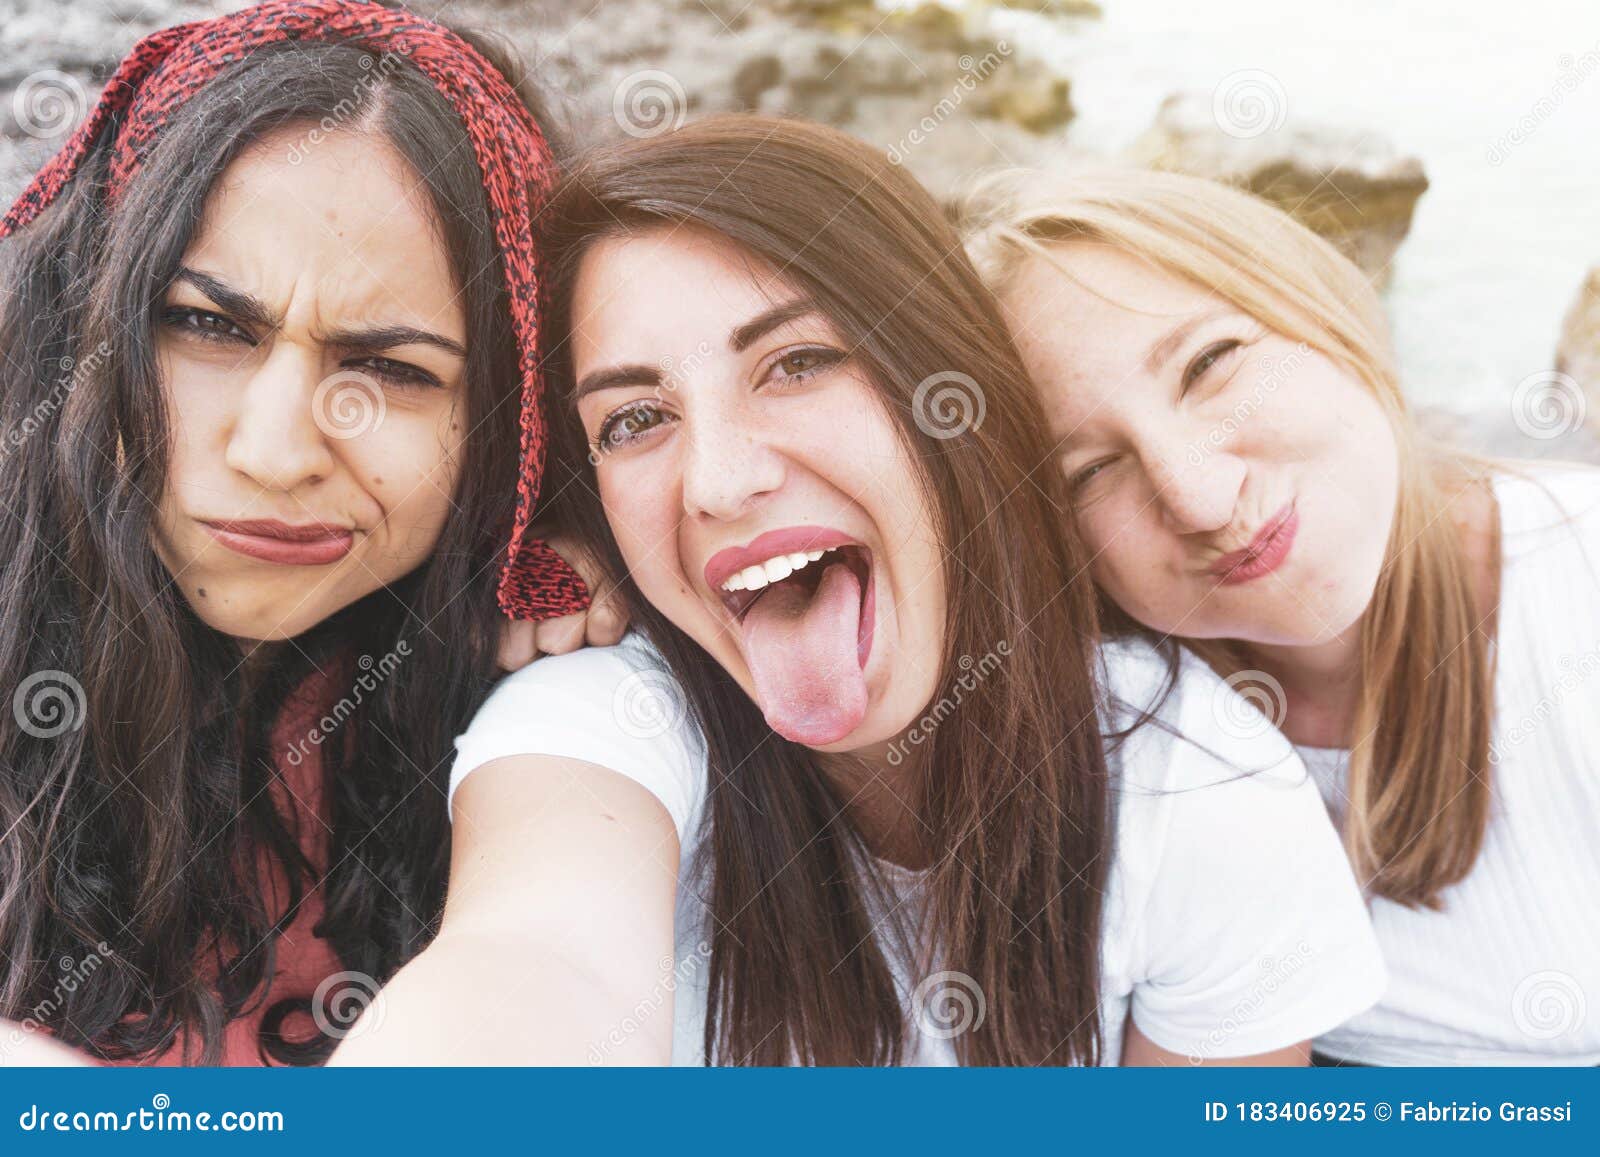 Group Of Happy Multiracial Friends Having Fun Taking A Funny Selfie 